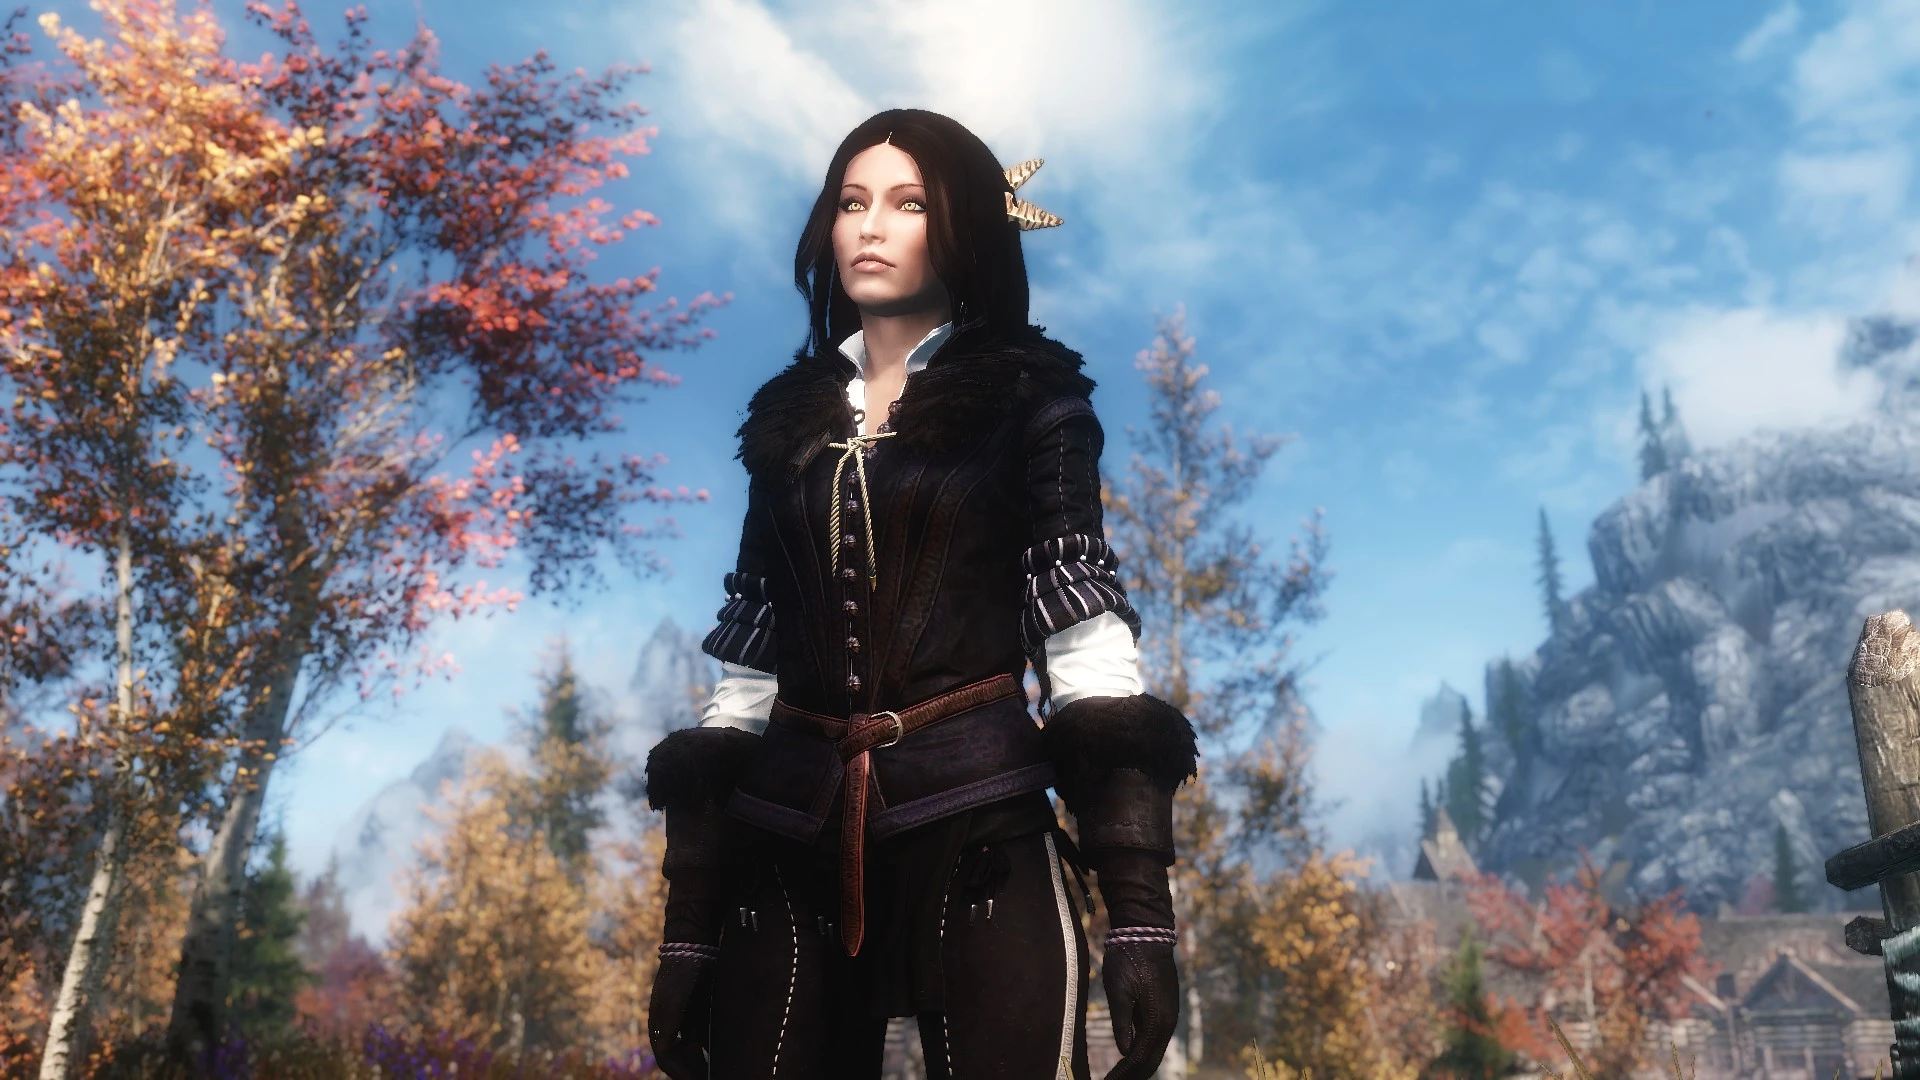 Yennefer of vengerberg the witcher 3 voiced standalone follower фото 70